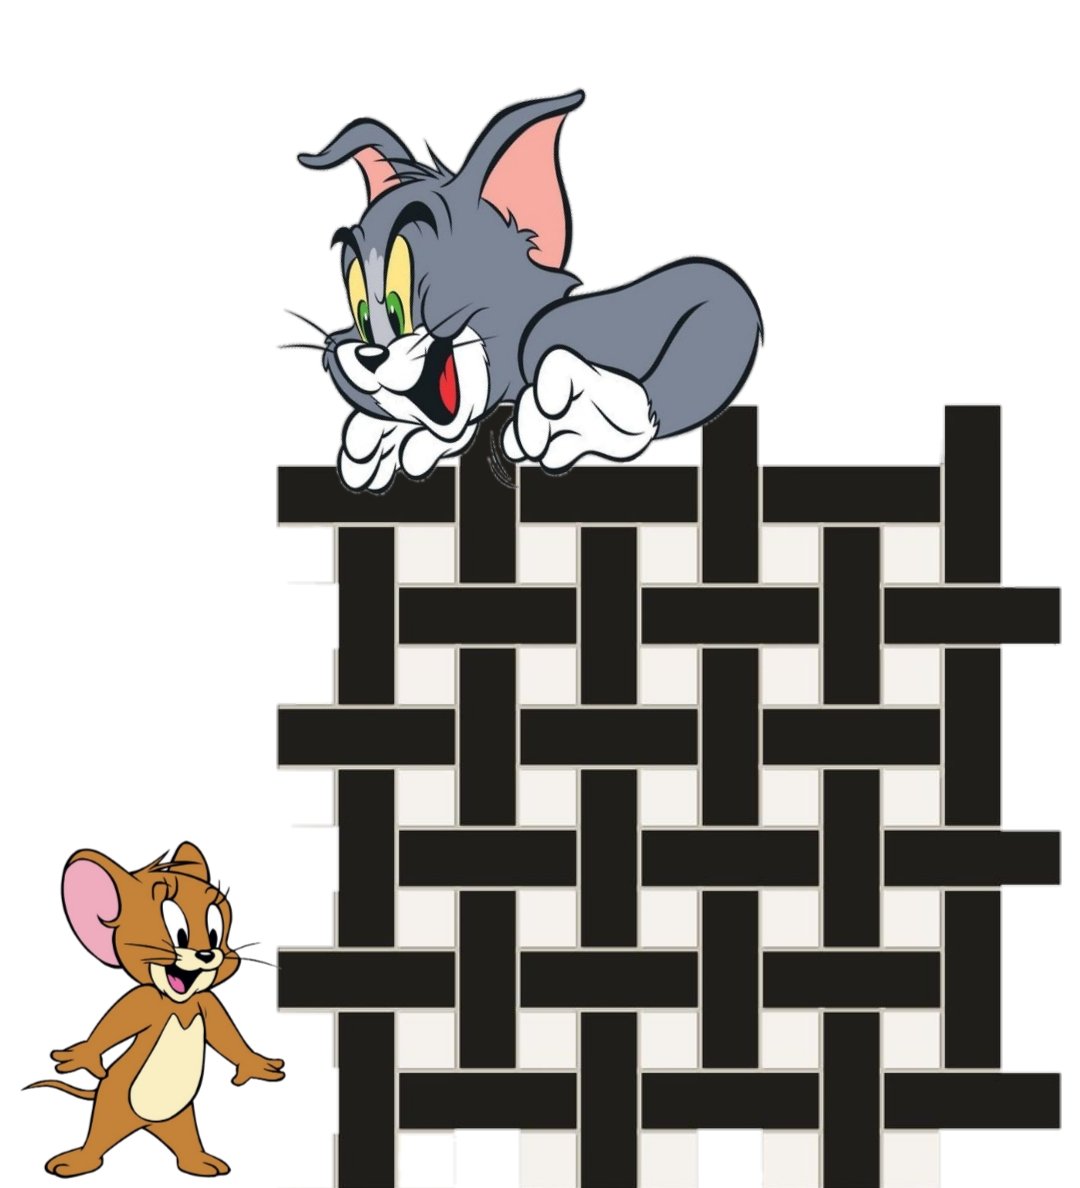 Tom And Jerry Image